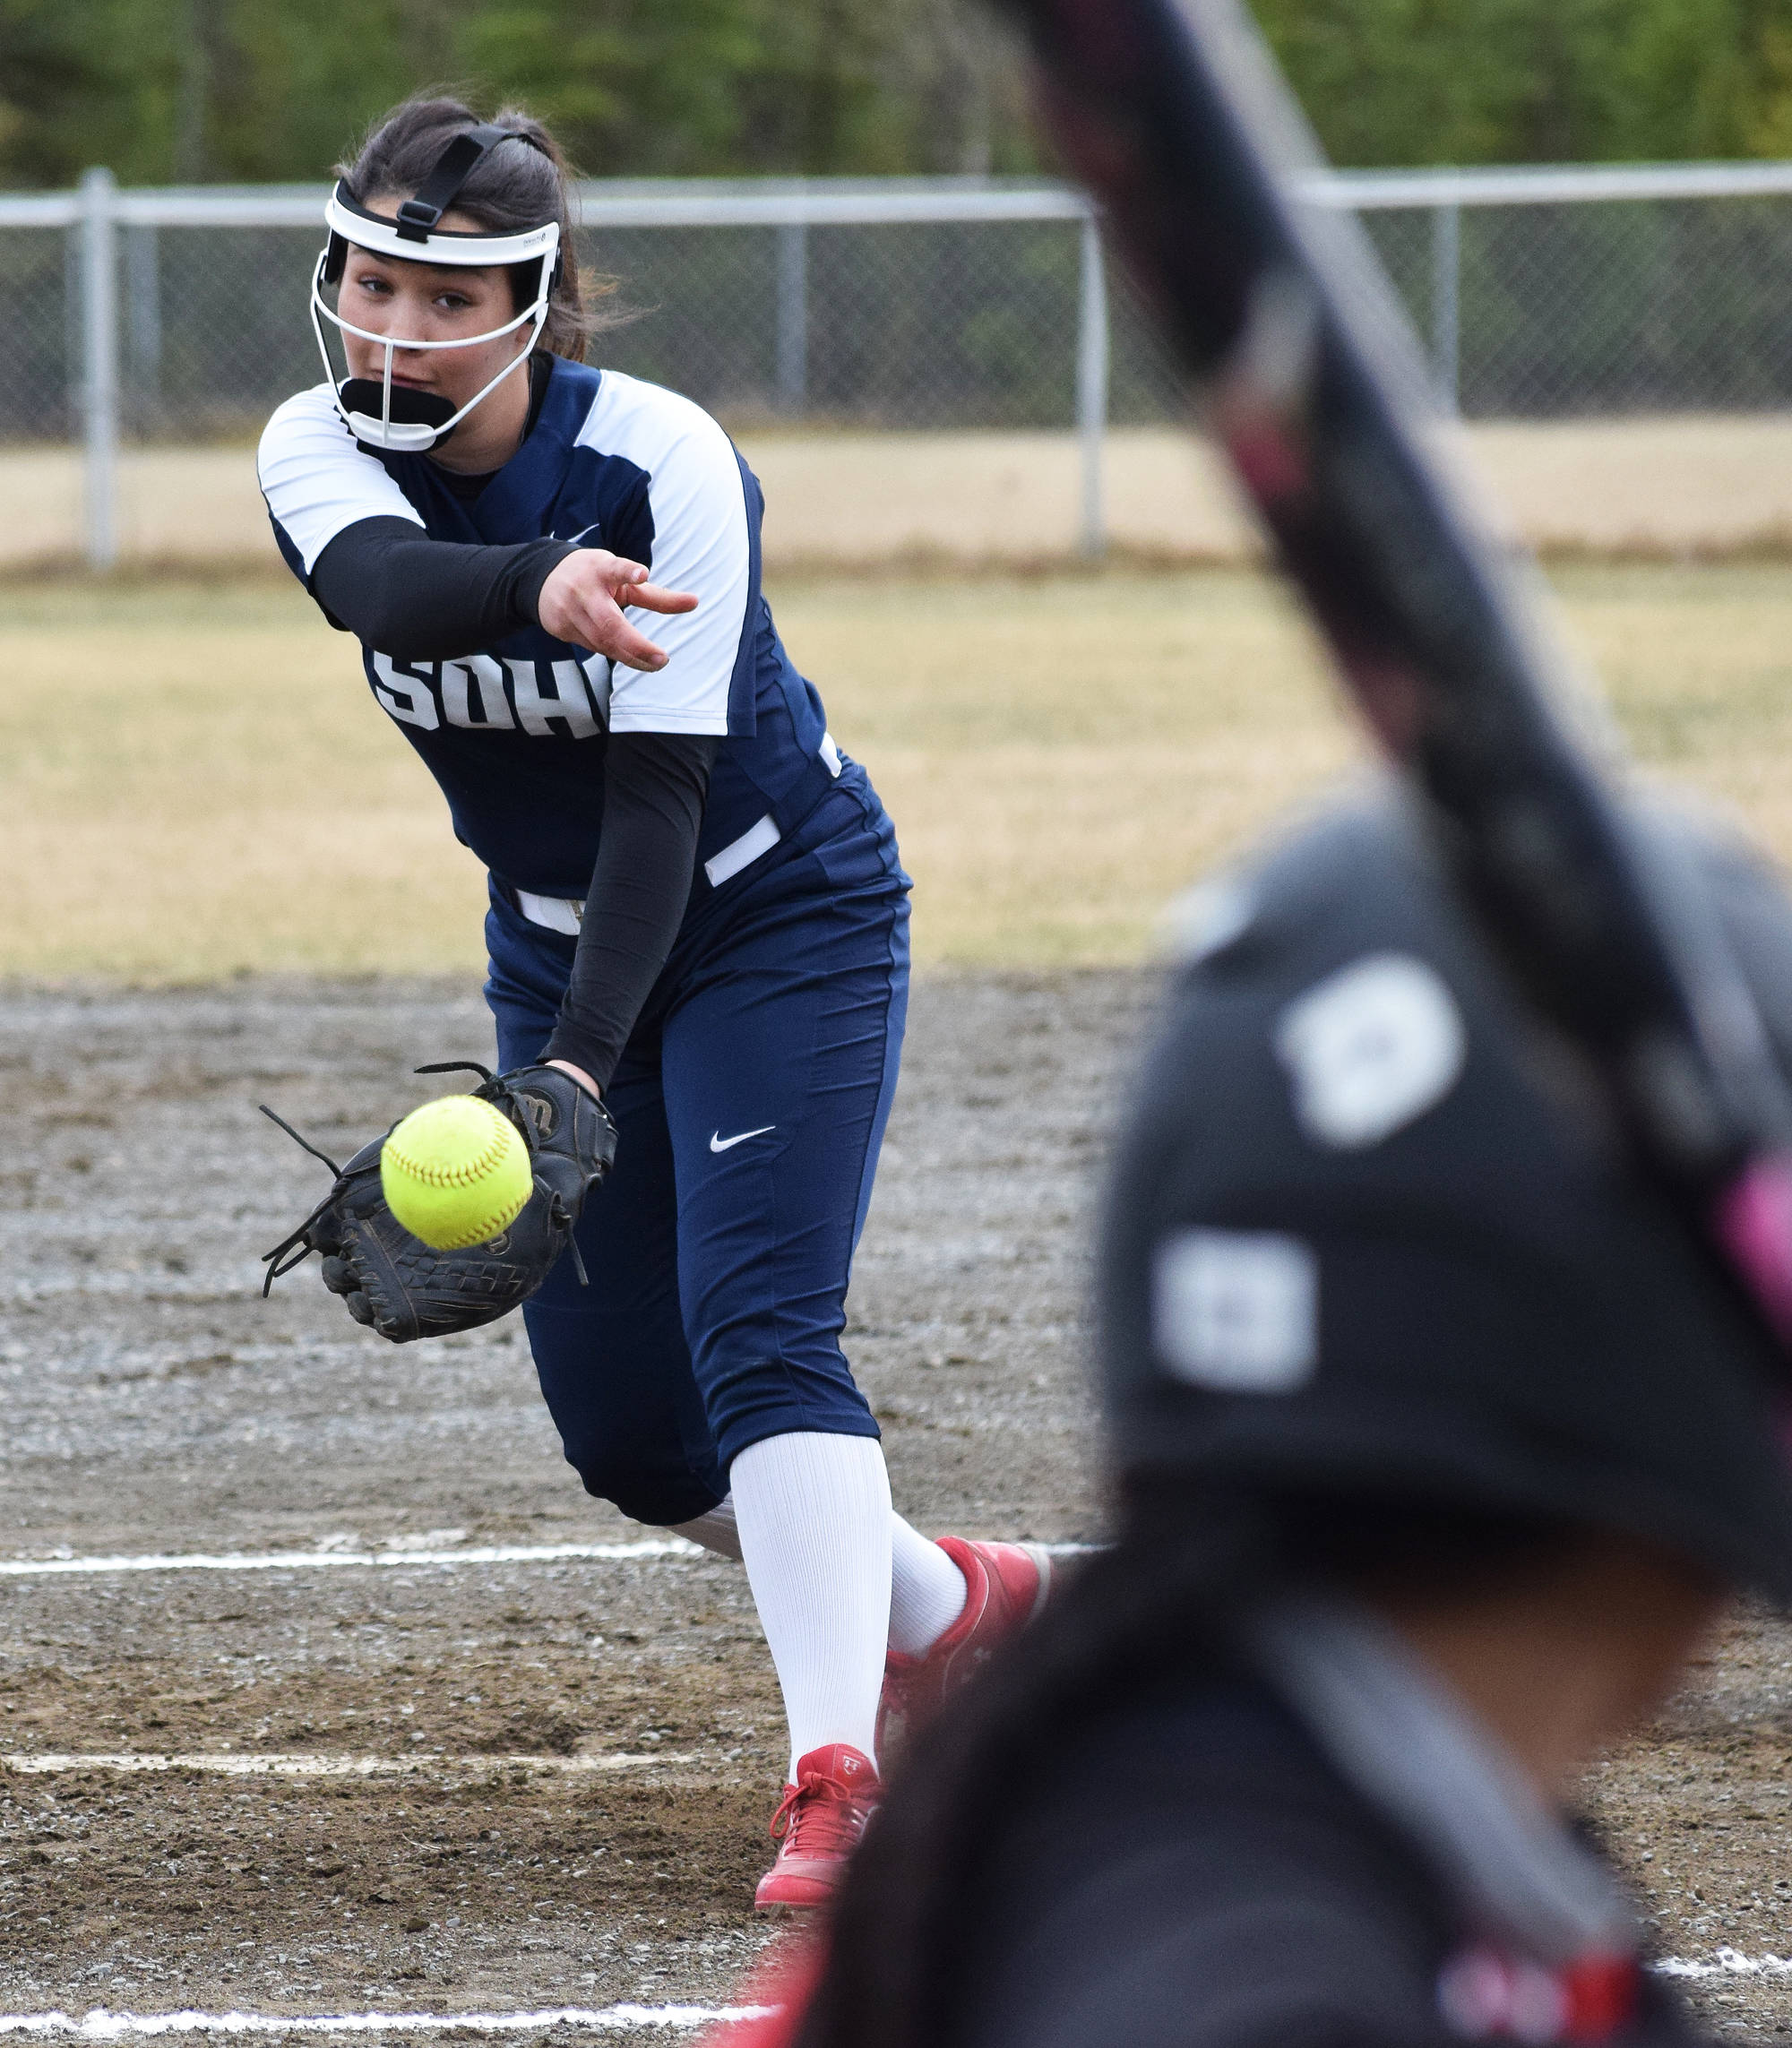 Soldotna starter Danielle Hills delivers a pitch to Kenai Central’s Patricia Catacutan, Wednesday at the Soldotna Little League Fields. (Photo by Joey Klecka/Peninsula Clarion)